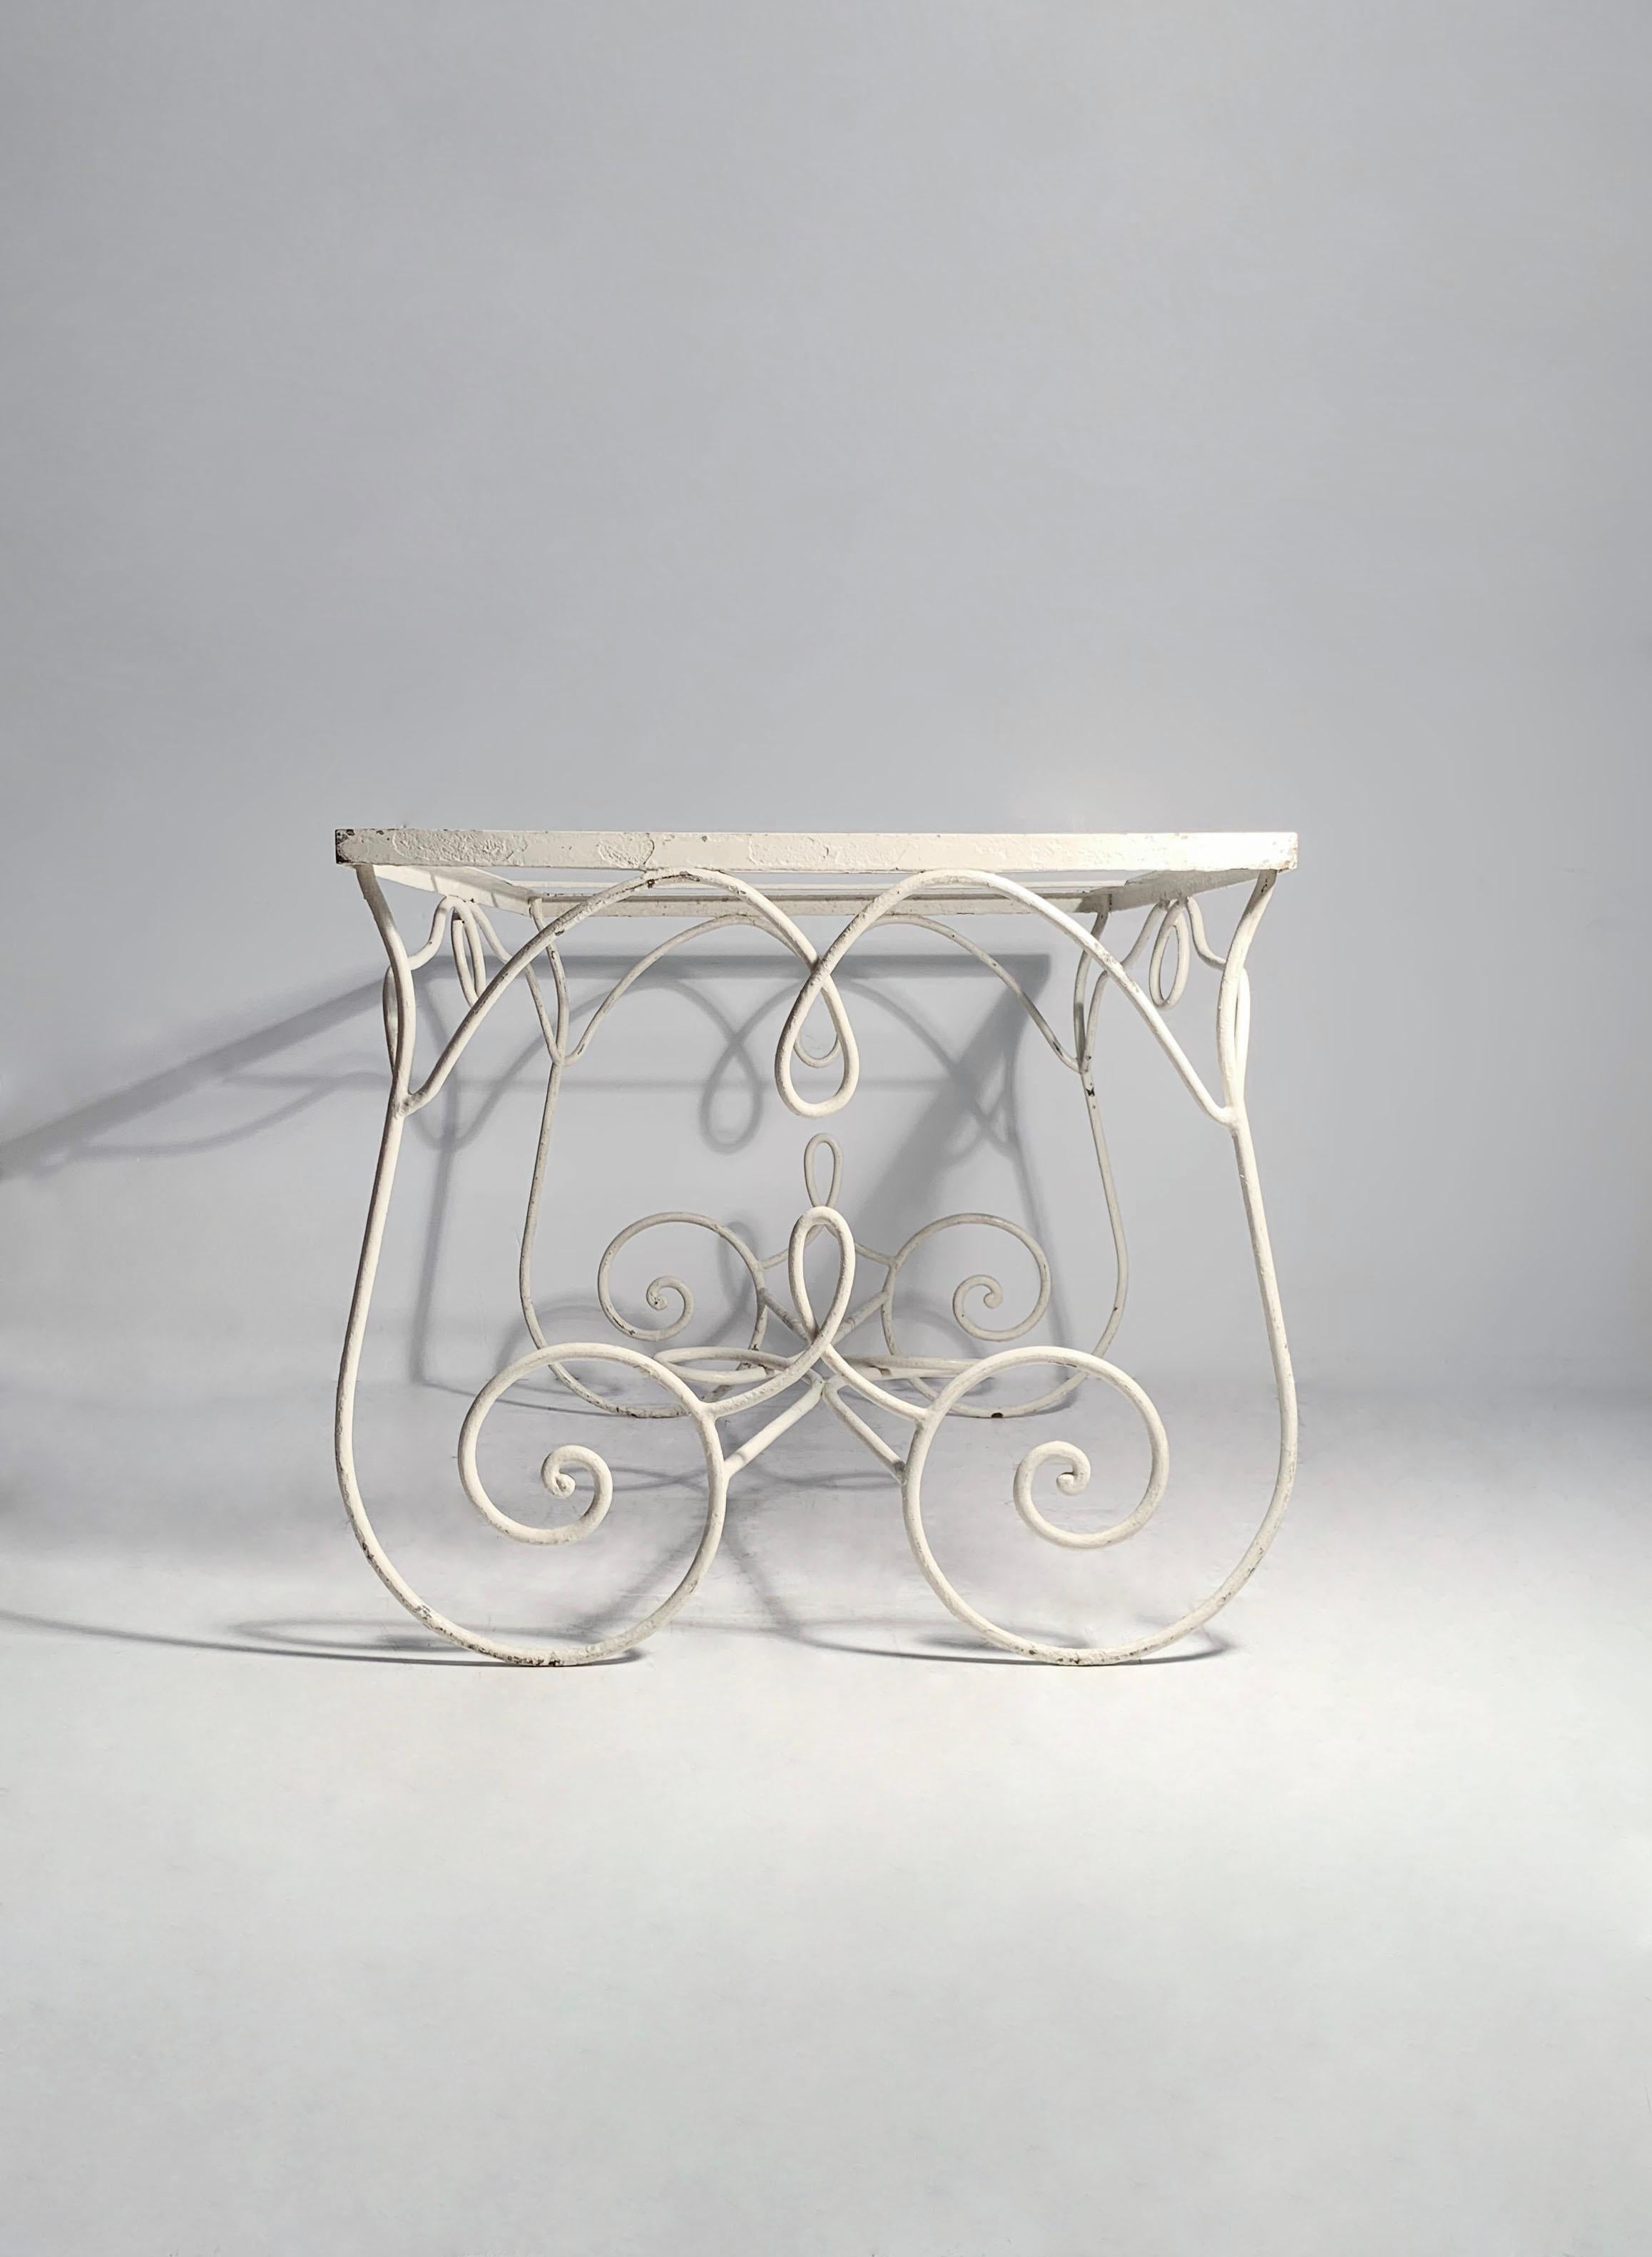 Mid-Century Modern Vintage French Wrought Iron Garden Dining Table Attributed to Rene Prou For Sale